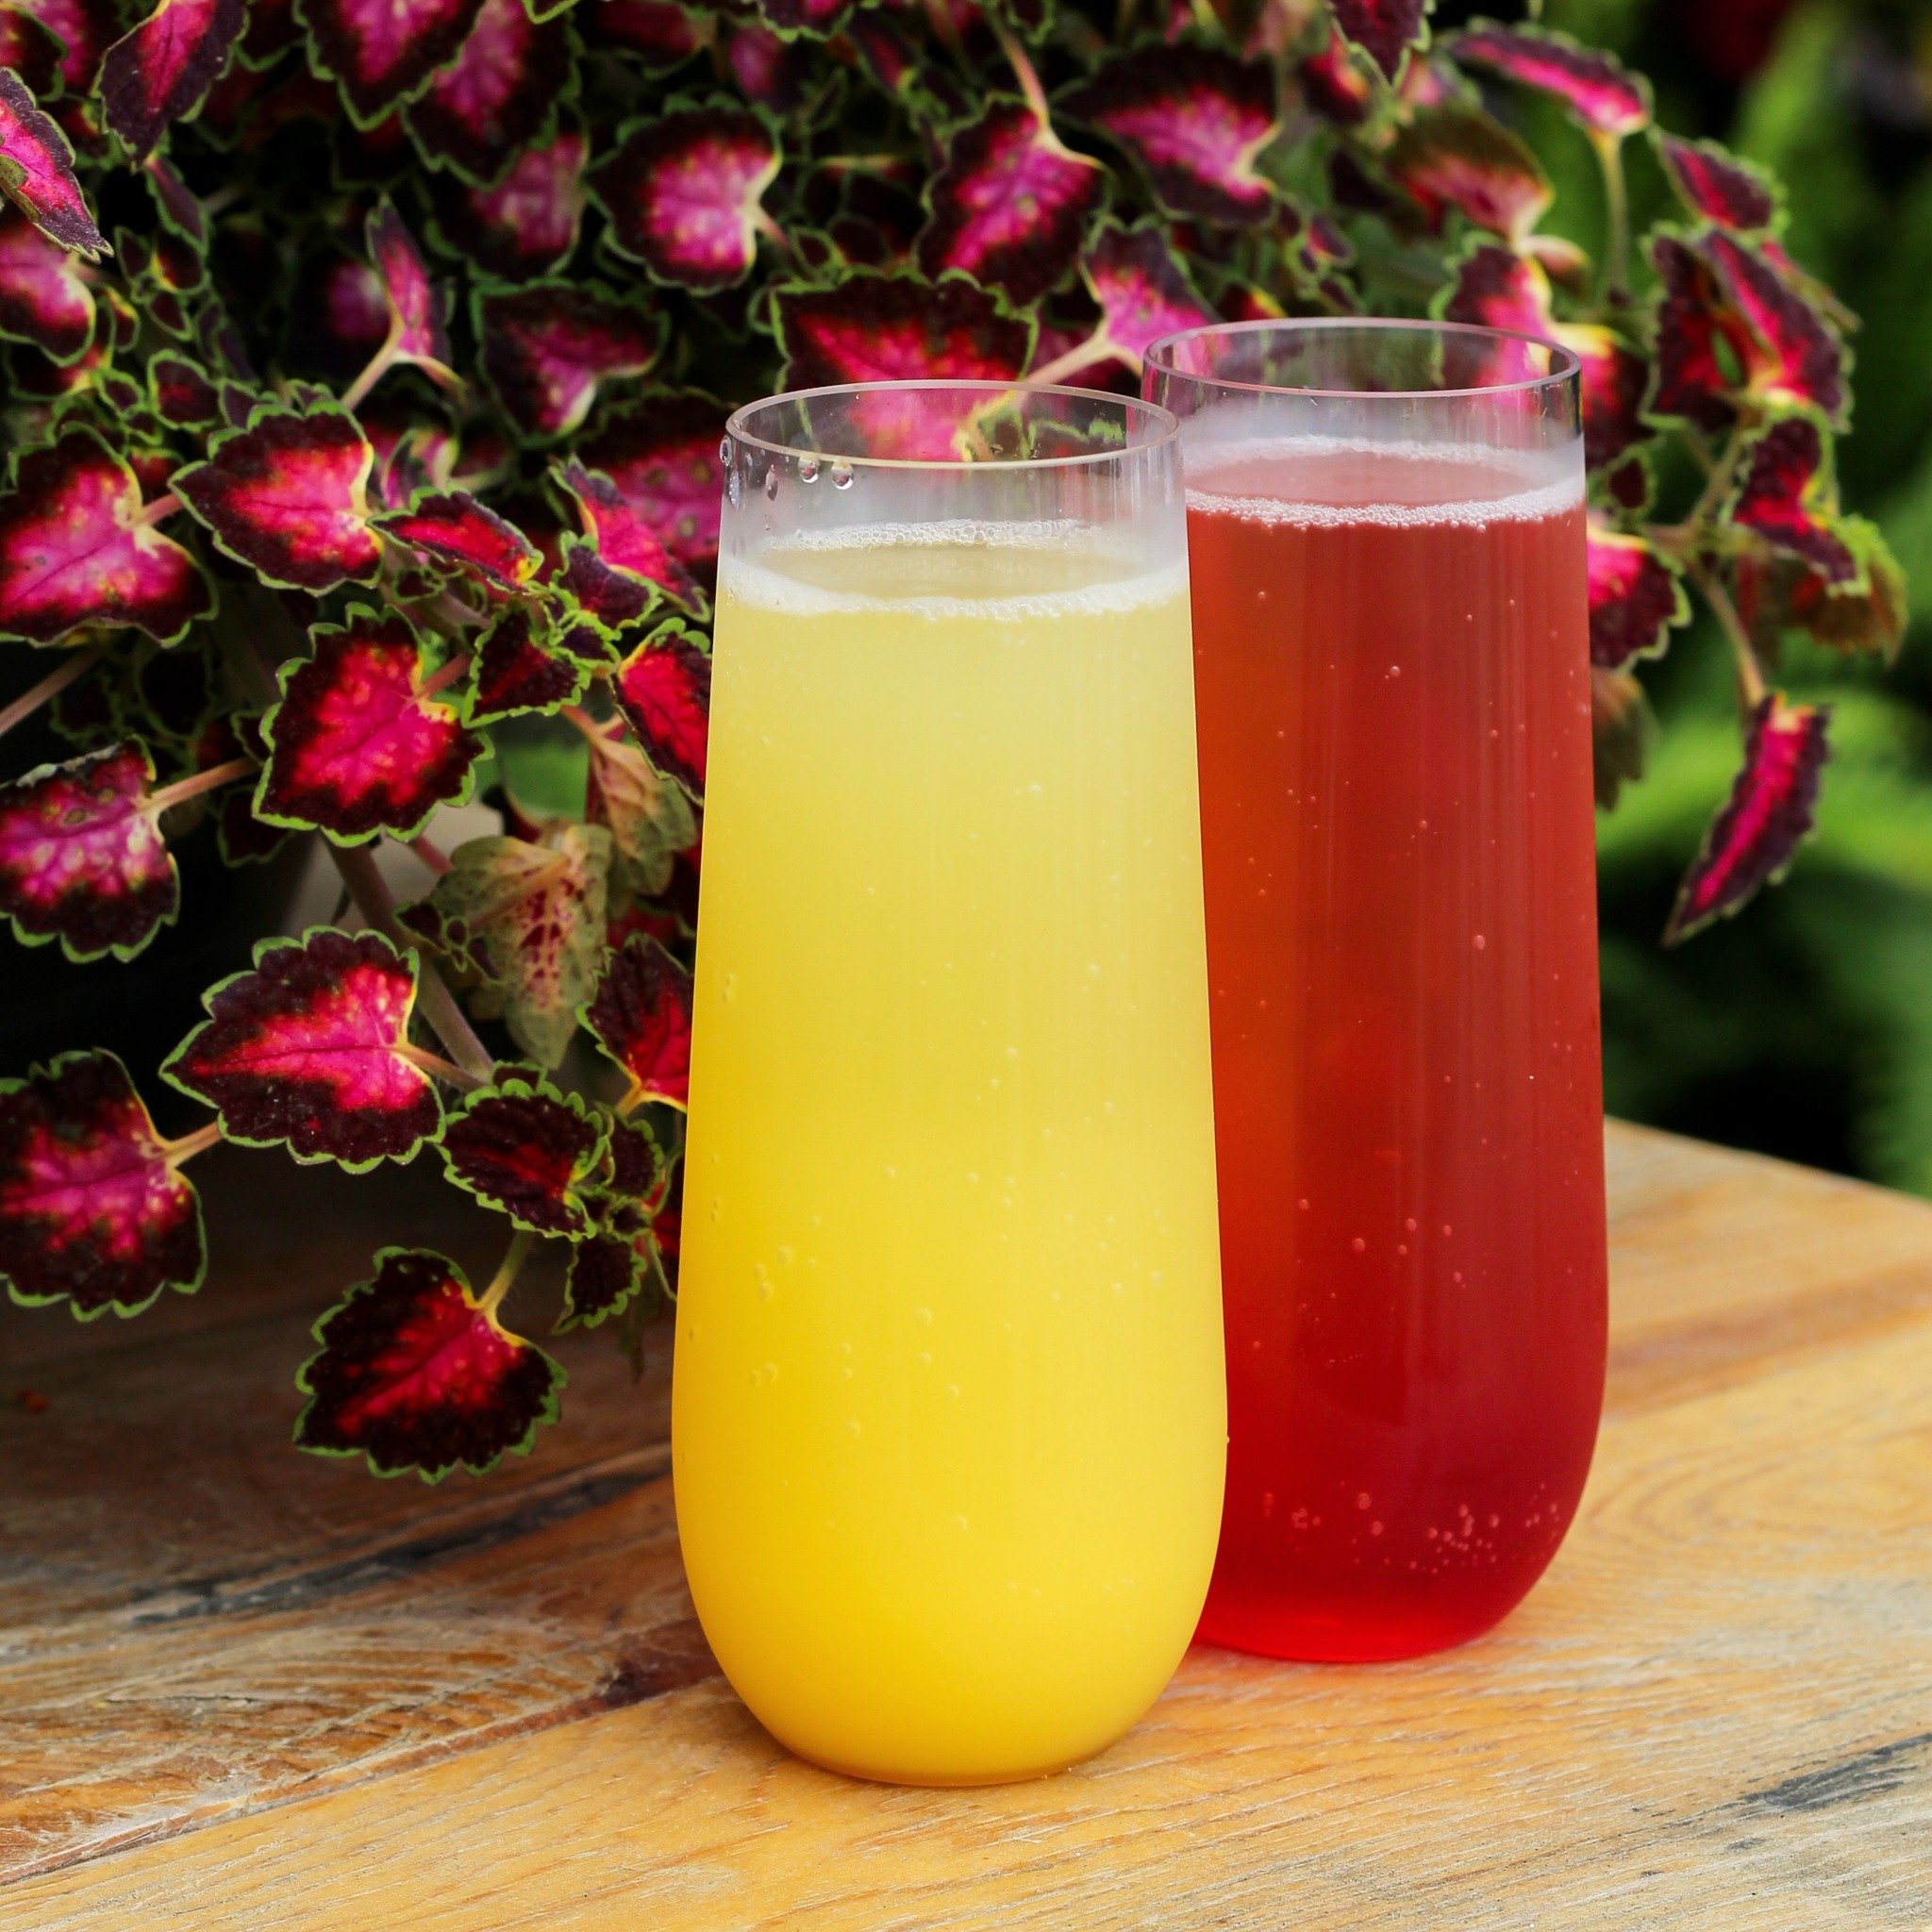 Moms get a FREE mimosa THIS Saturday 🥂

We&rsquo;re excited to celebrate with you from 9-4 and enjoy some perfect weather in the garden ☀️🌱🌸

#mimosas #momsandmimosas #momsandmimosasevent #garden #flowers #event #shoplocal #m37 #mercantile37